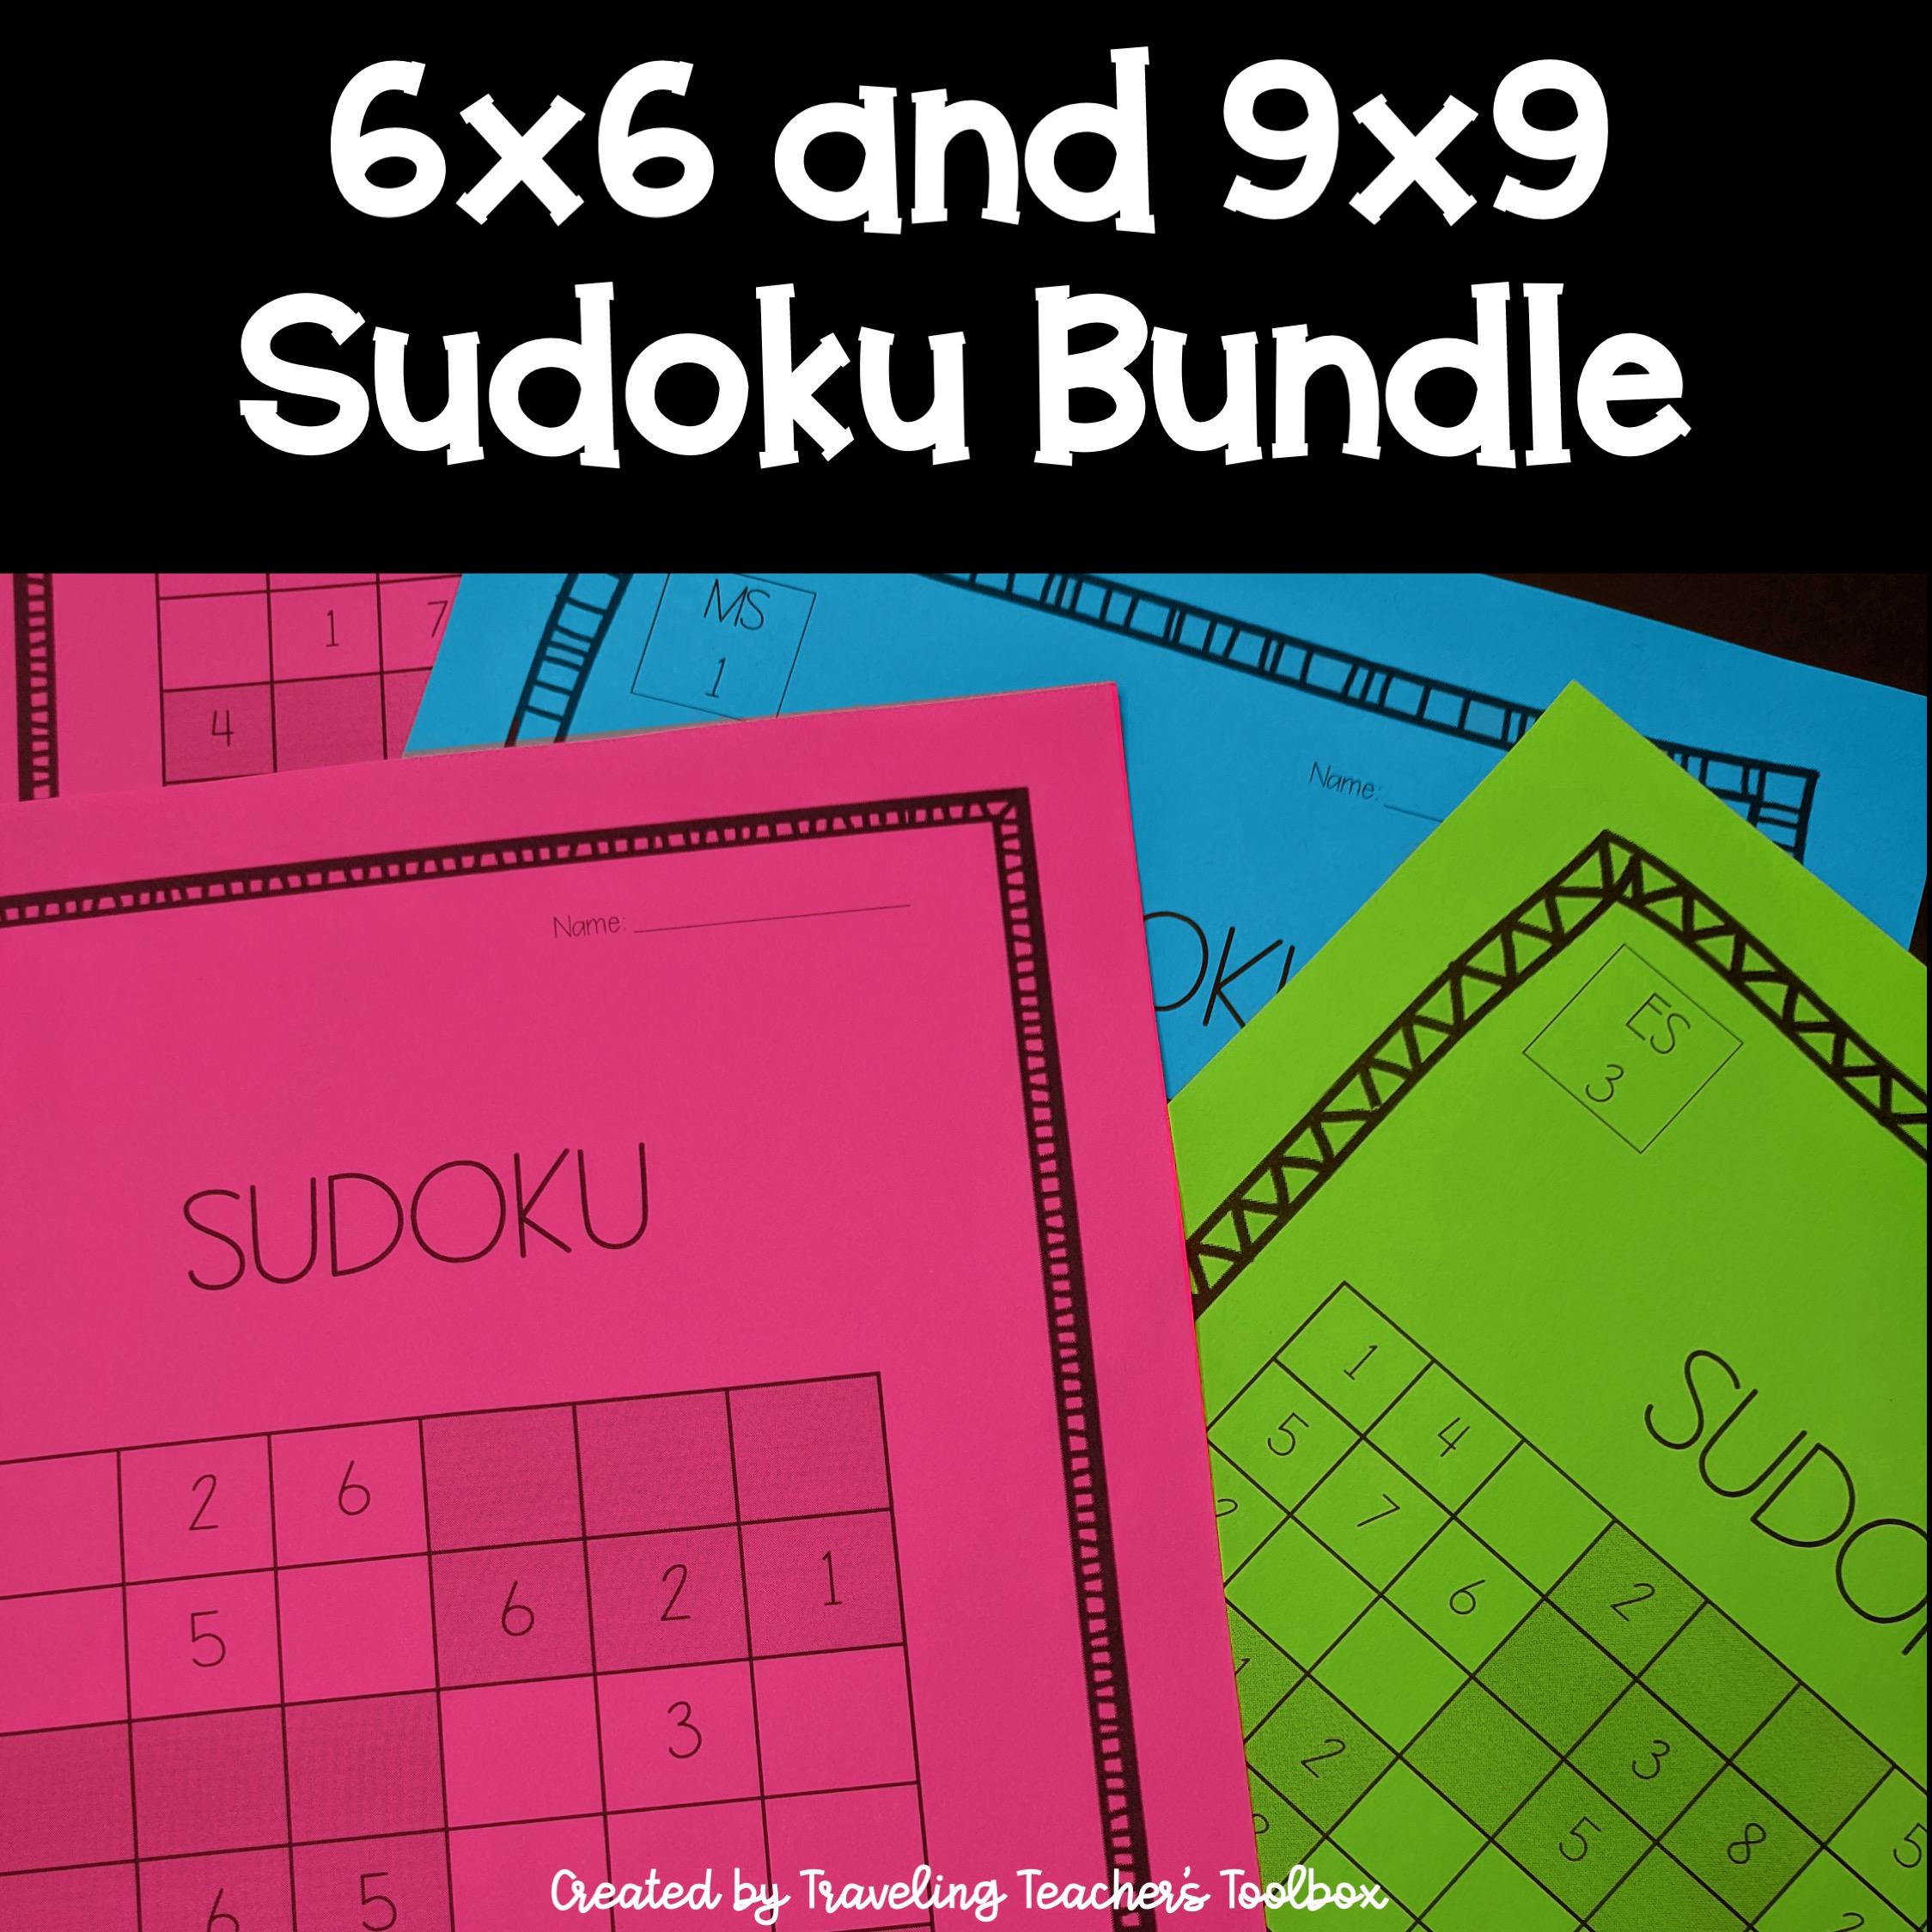 Clickable link to sudoku bundle in tpt store. Image of 6x6 and 9x9 sudoku